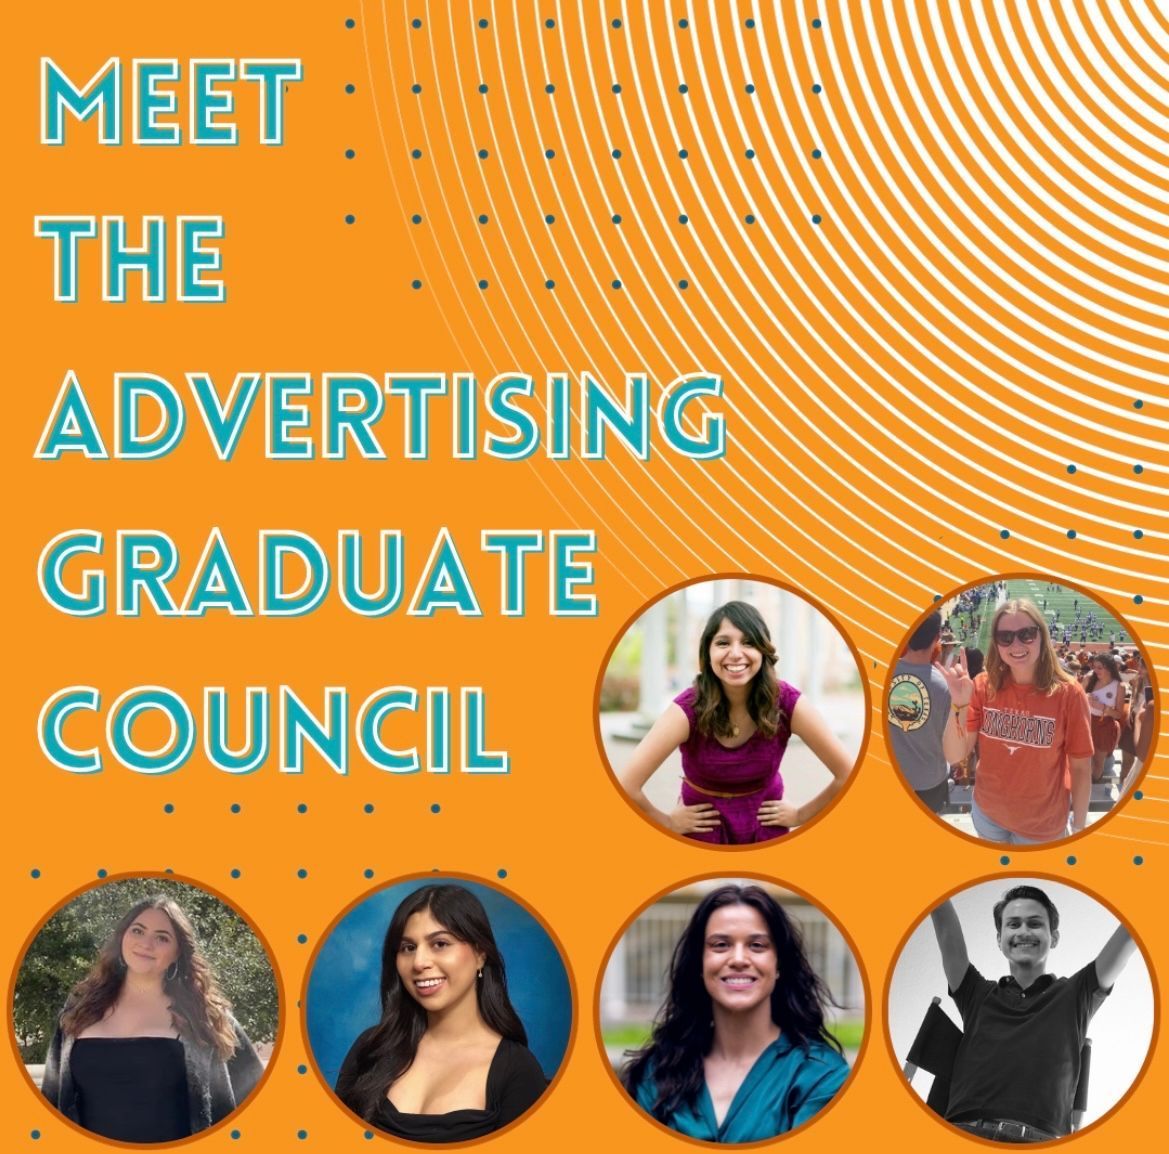 Students in the Advertising Master’s program coming from all different backgrounds and experiences! Check out the article to learn more about this years Advertising Graduate Council! 🤘🤘 #TXADPR buff.ly/3Qll4kQ